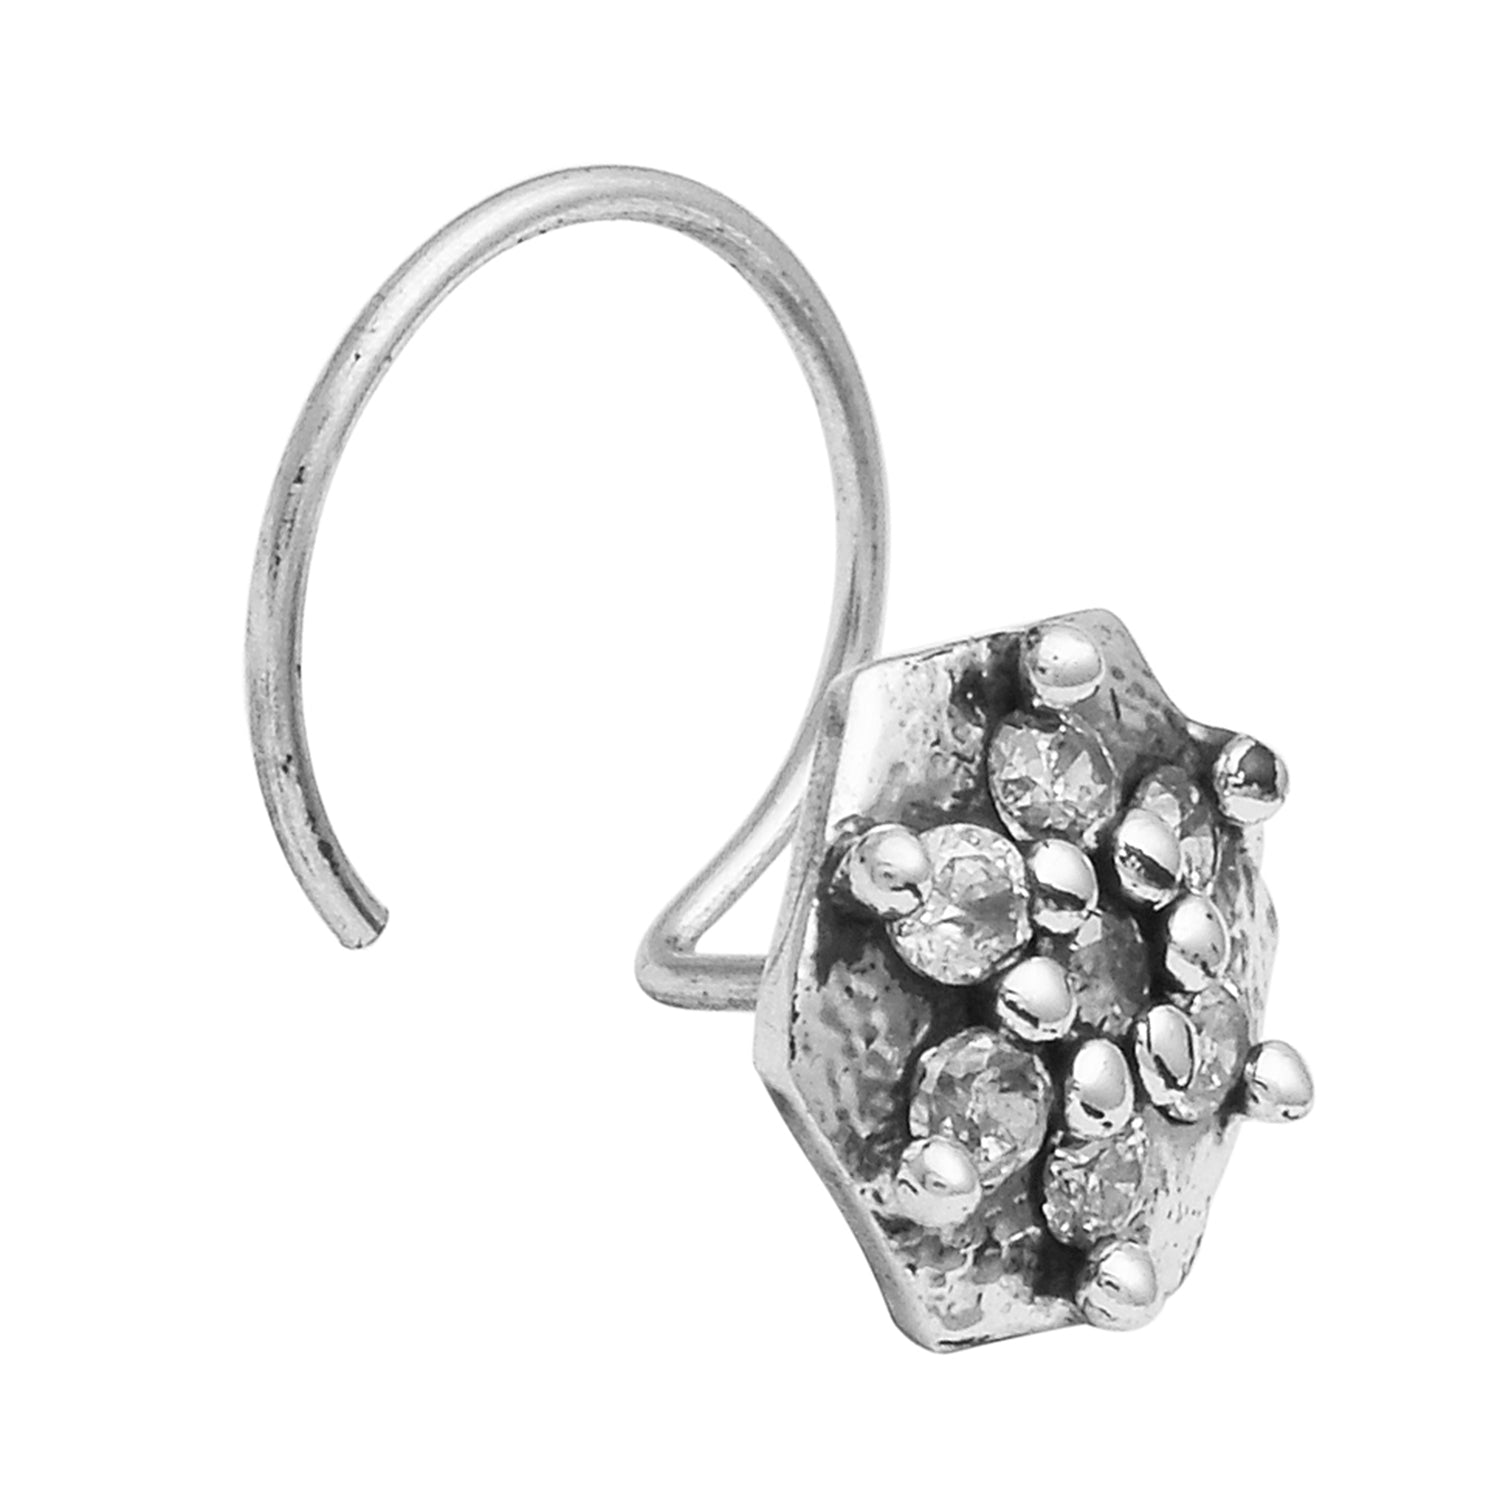 Ouneed Copper Fittings Silver-plated Piercing Jewelry C-shaped False Nose  Ring - Walmart.com